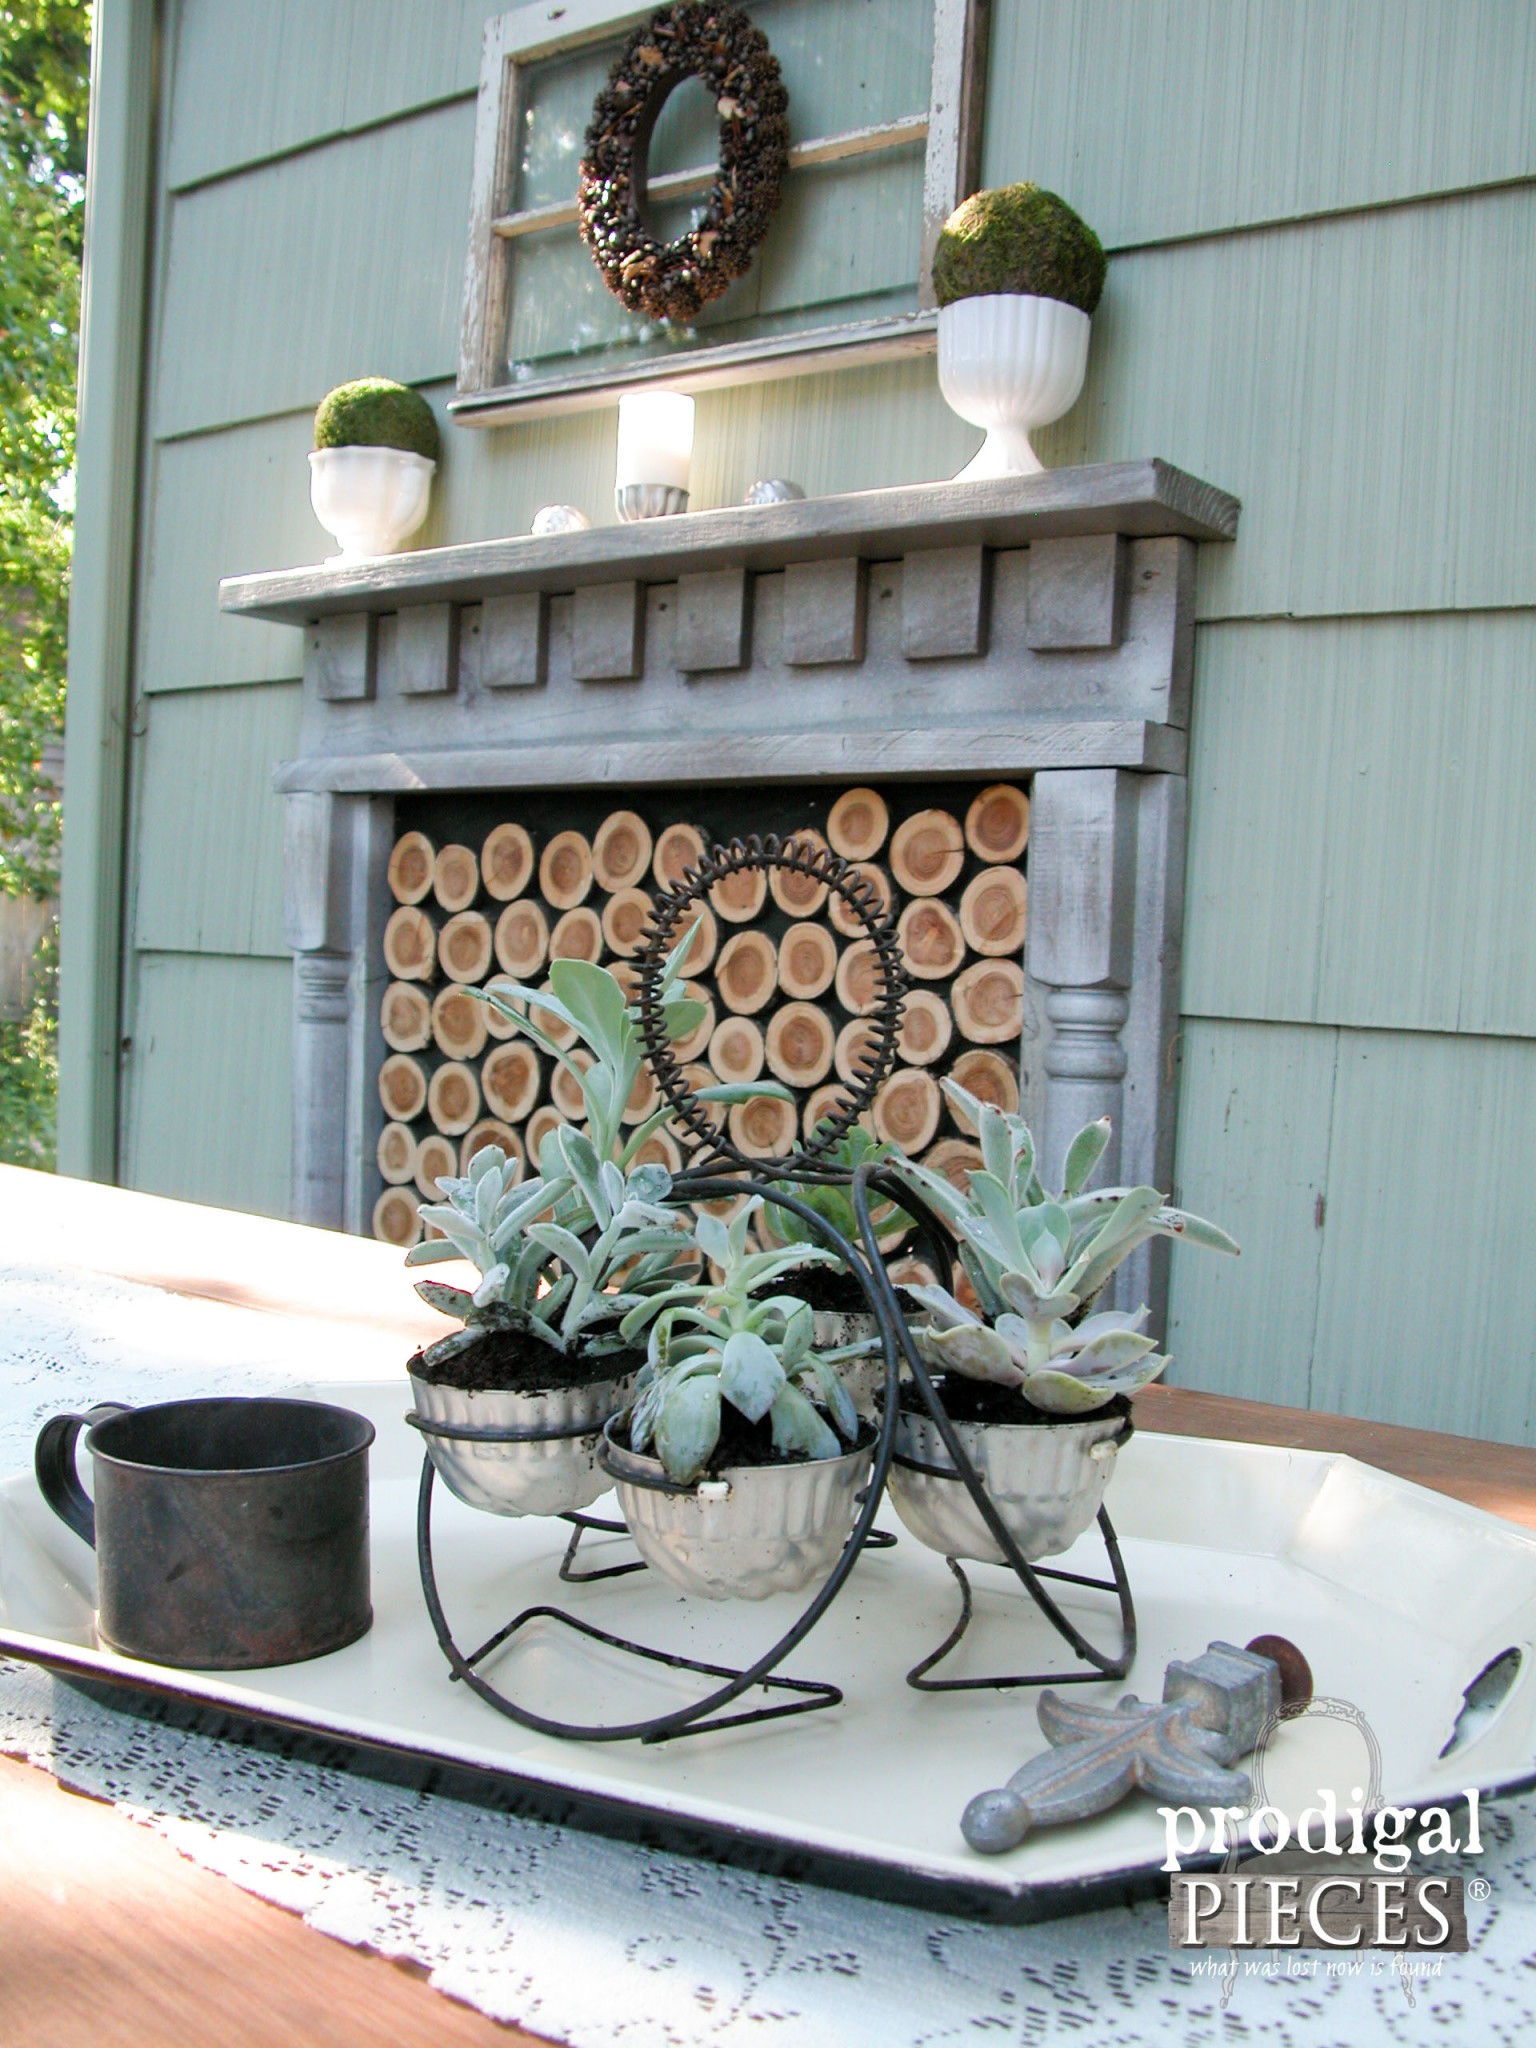 Succulents in Repurposed Planter on Patio by Prodigal Pieces | www.prodigalpieces.com